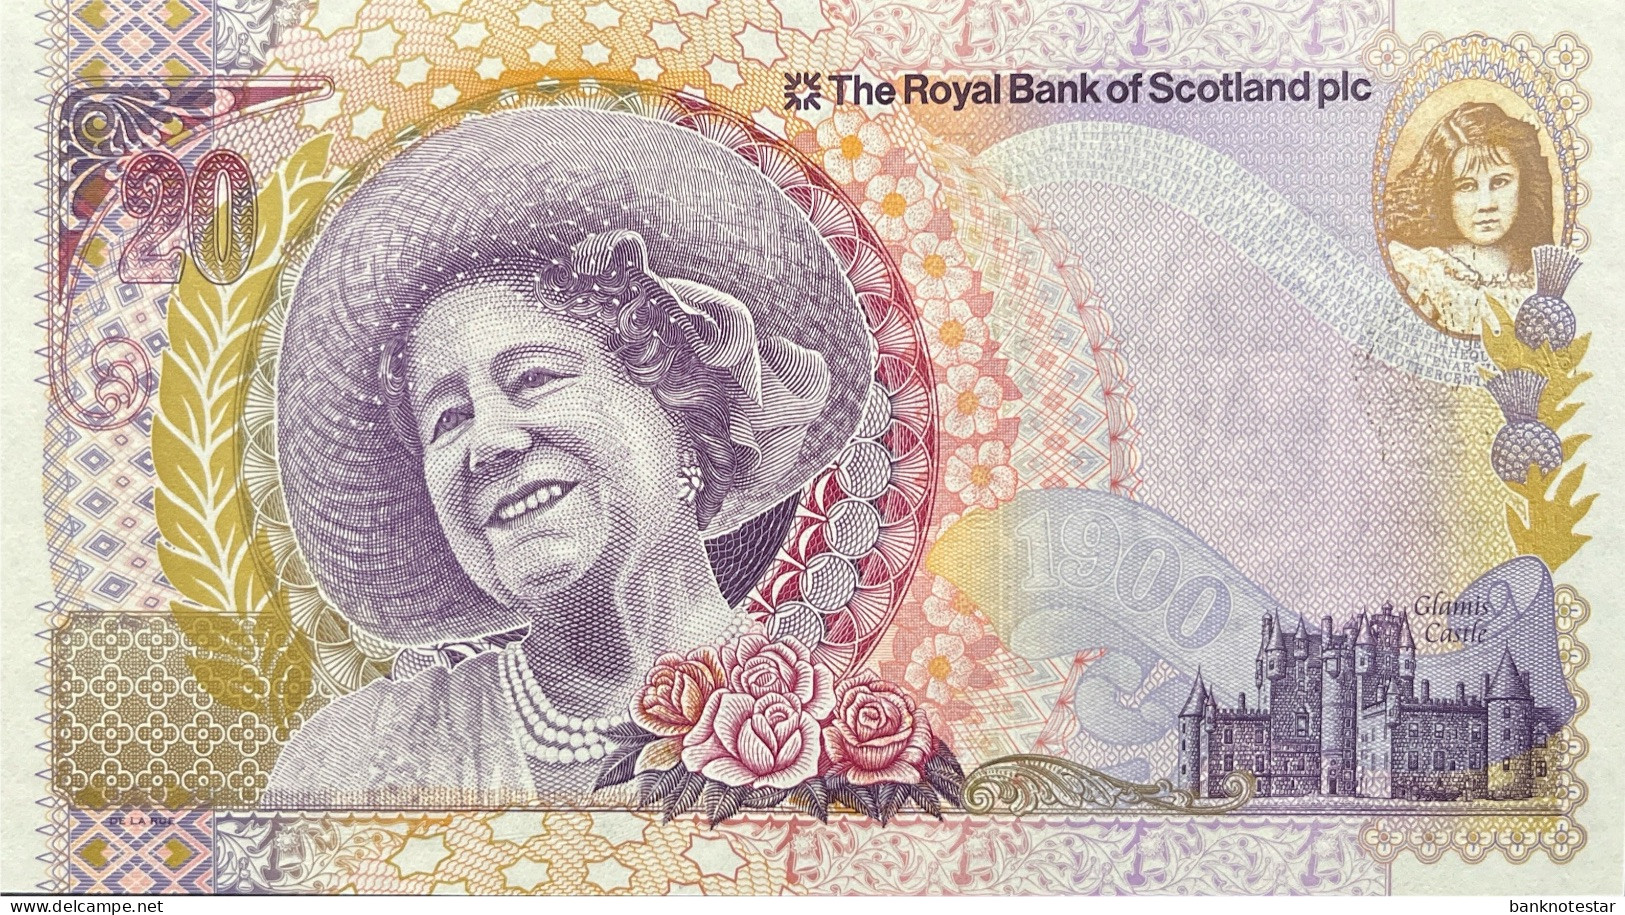 Scotland 20 Pounds, P-361 (4.8.2000) - UNC - Queen Mother 100th Birthday Issue - 20 Pounds